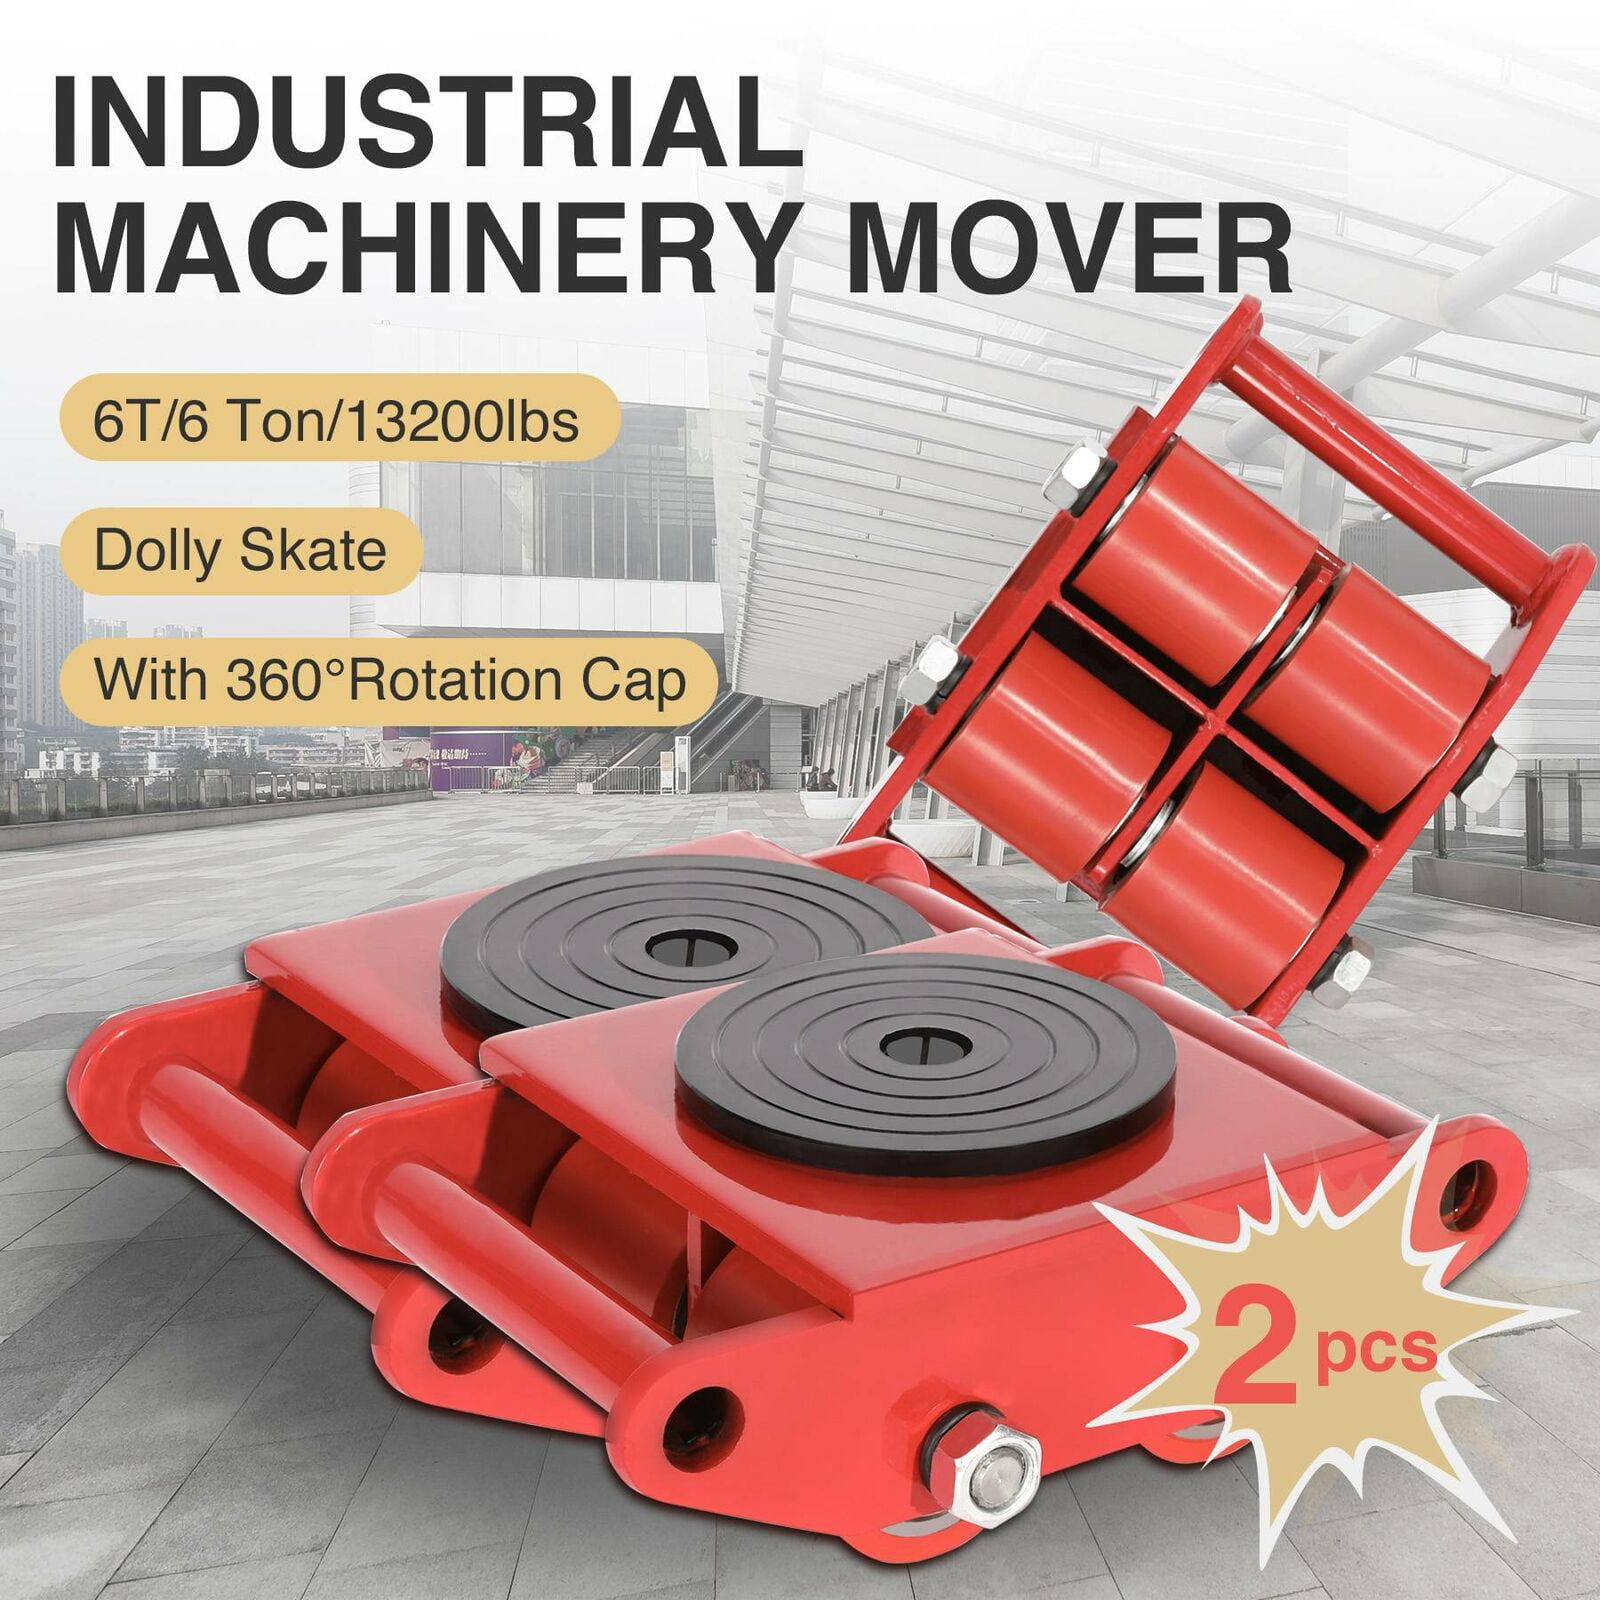 2PCS Industrial Machinery Mover w Swivel Cap 6T Dolly Skate Roller Swivel Plate 